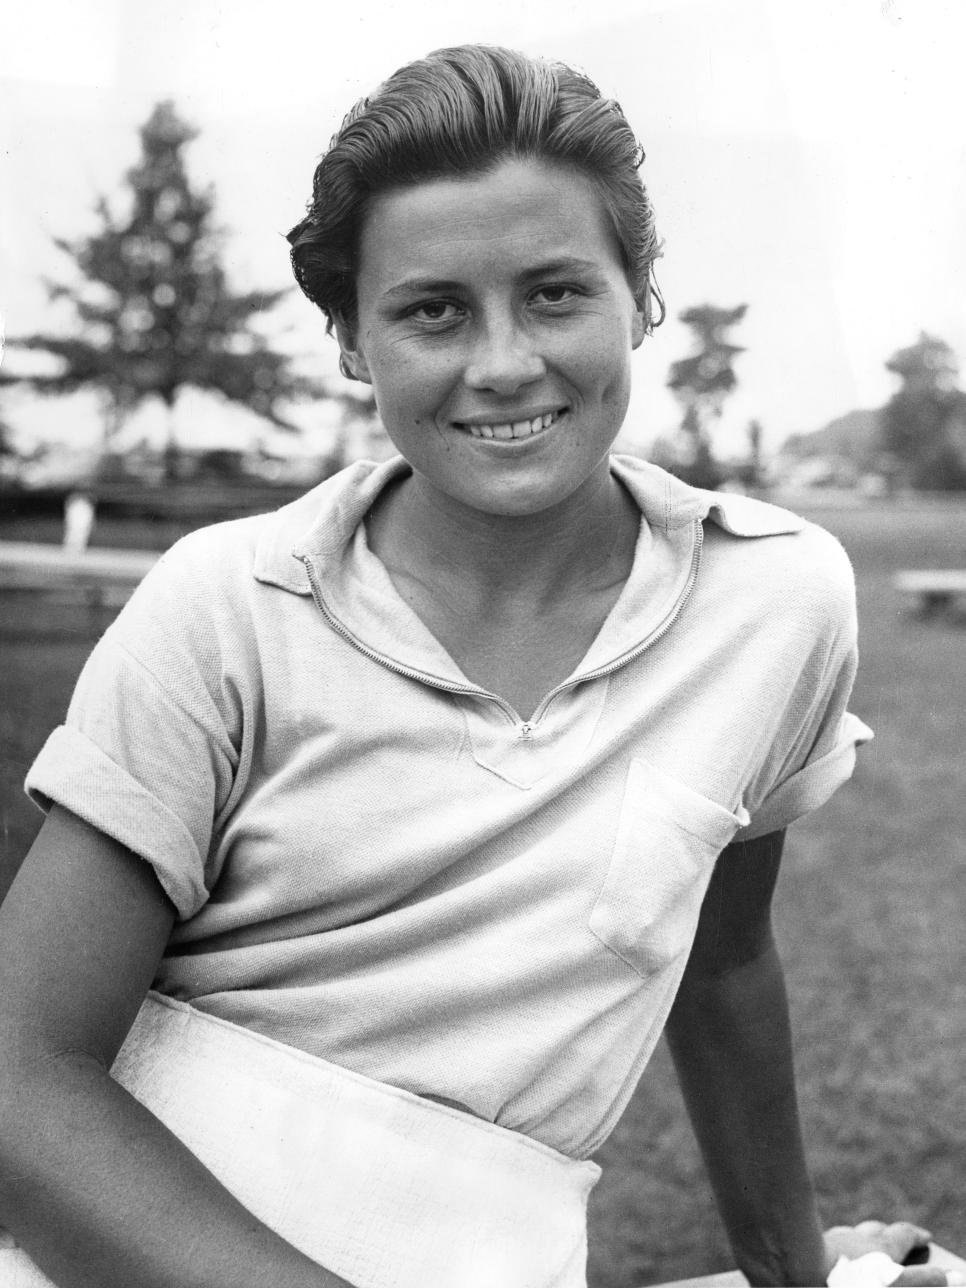 Marion Miley, date and location unknown. This vintage gelatin silver image is from the Howard Schickler collection, acquired by the USGA . (Copyright Unknown/Courtesy USGA Archives)